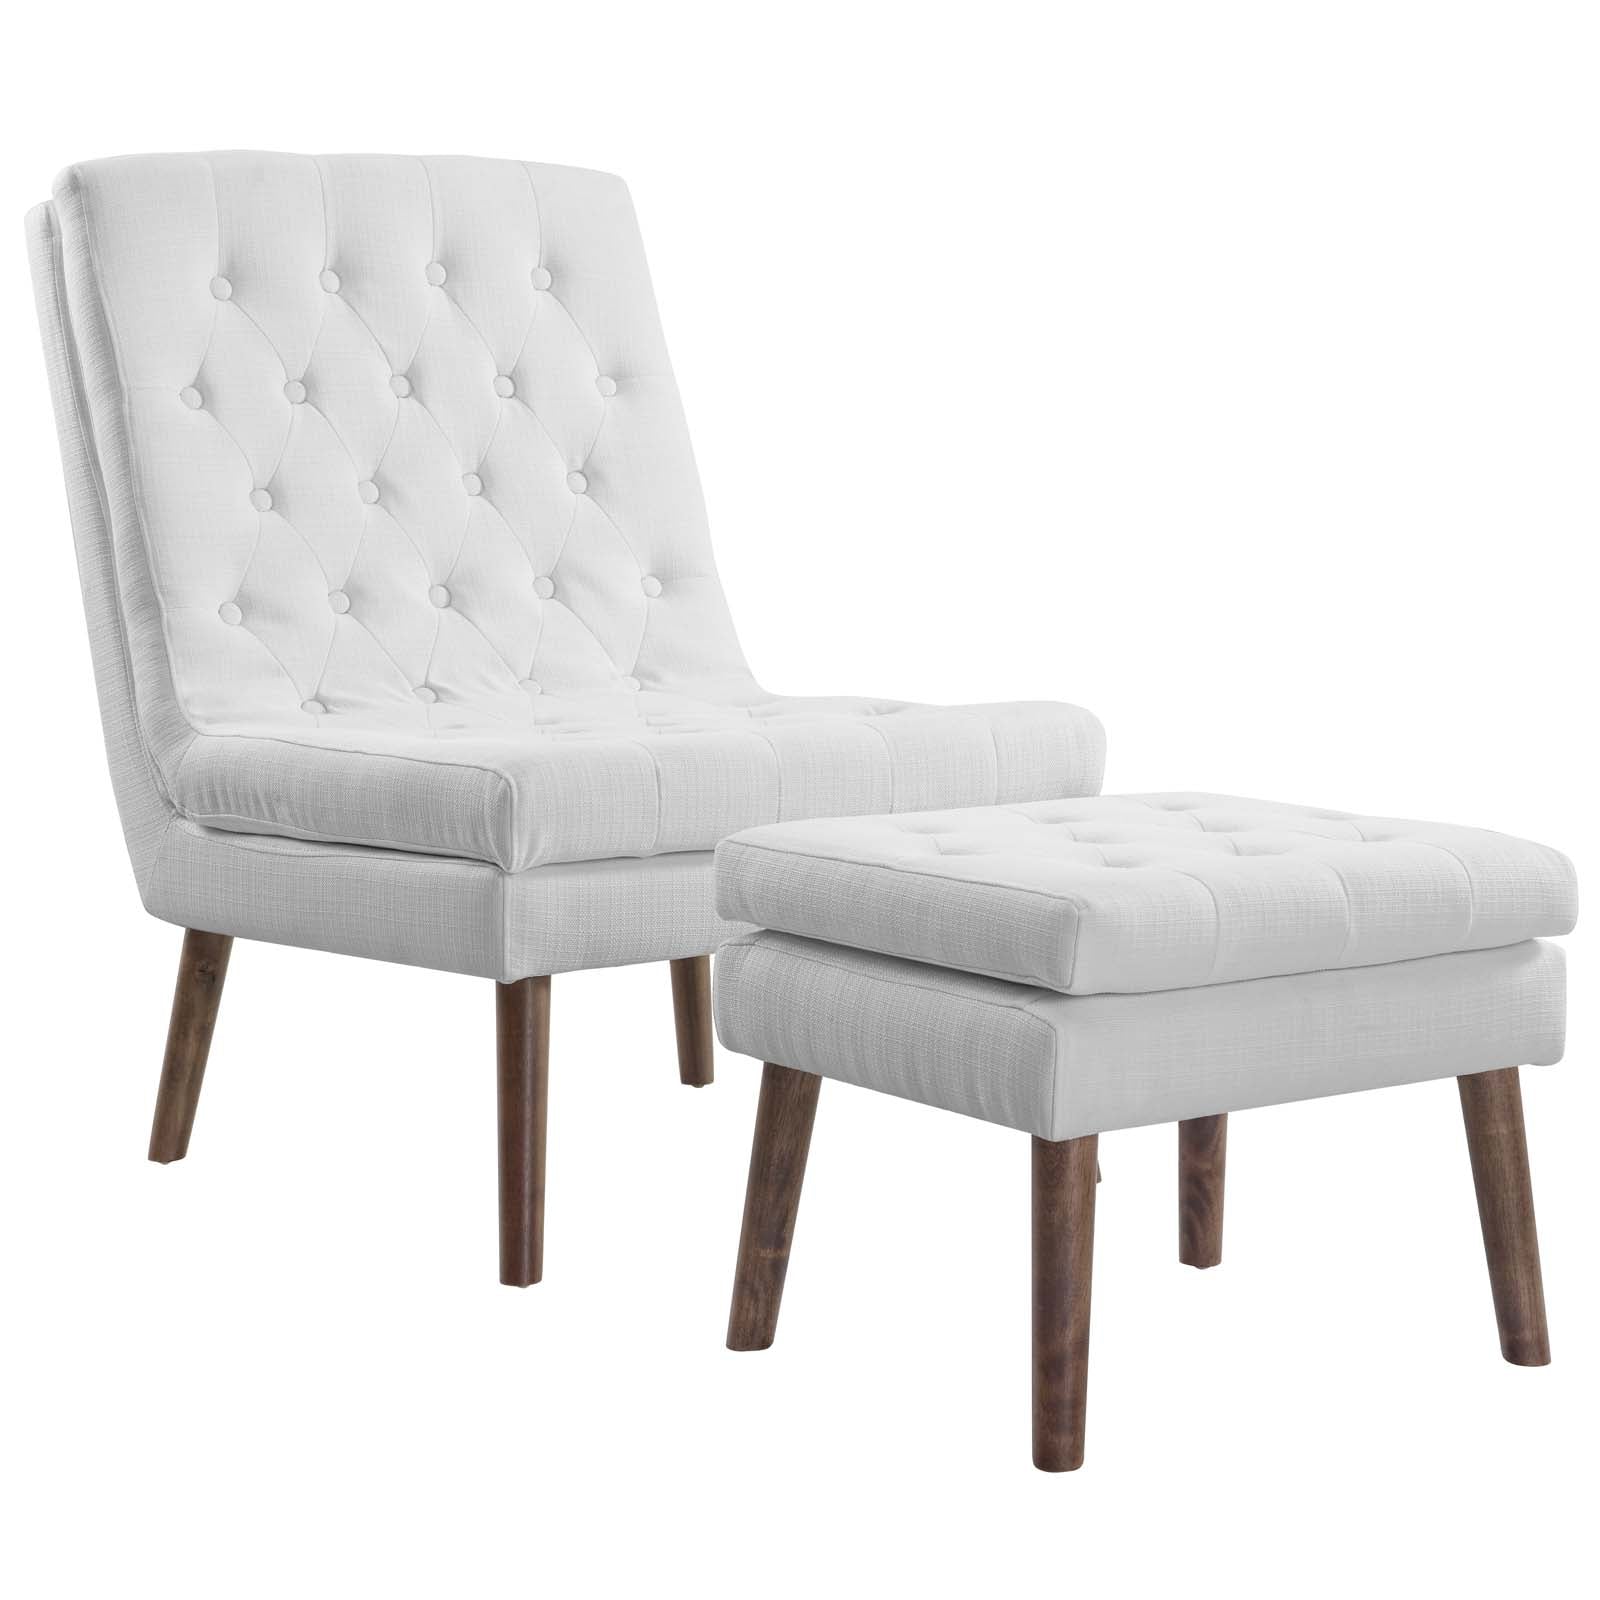 Modway Living Room Sets - Modify Upholstered Lounge Chair and Ottoman White